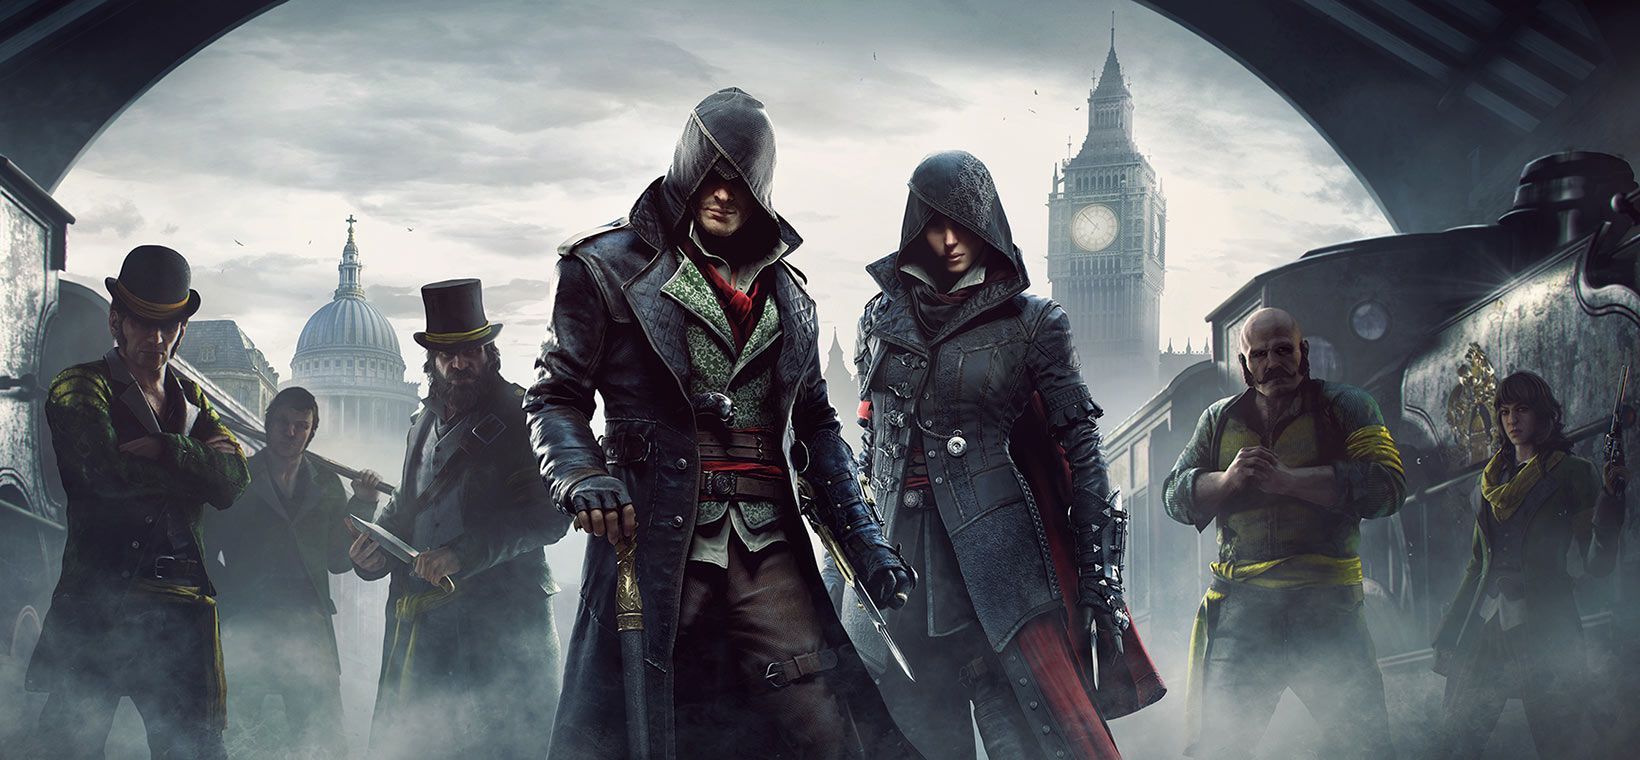 Assasin's Creed: Syndicate